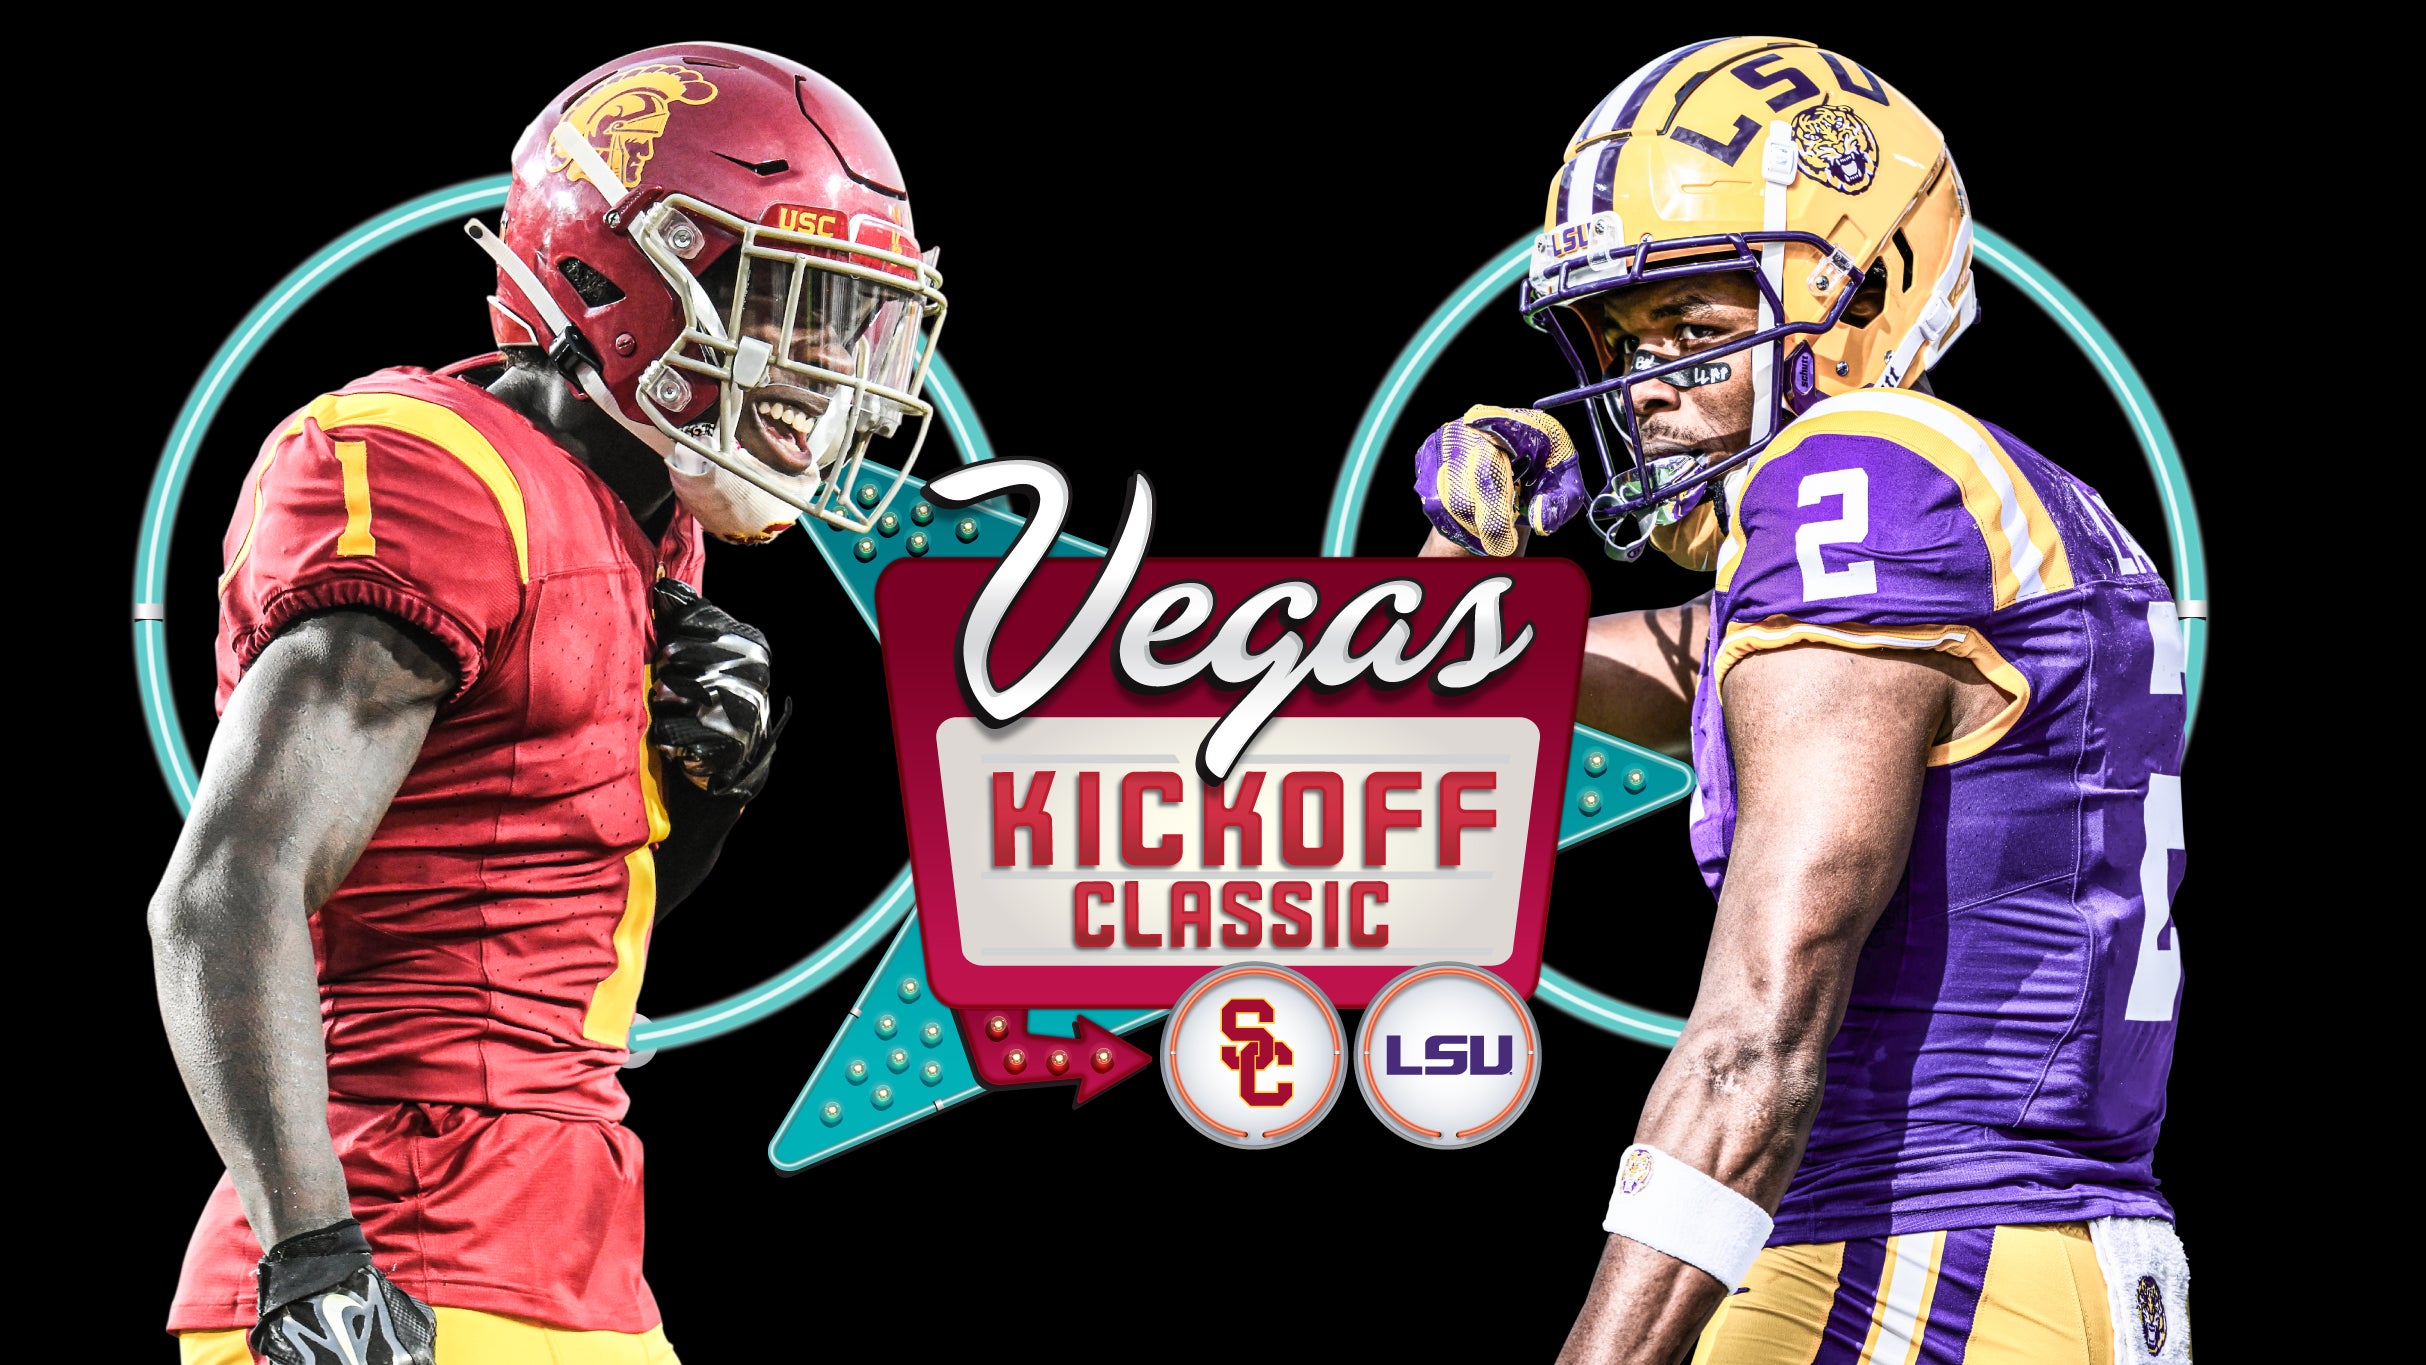 Vegas Kickoff Classic: USC v LSU presale code for approved tickets in Las Vegas 